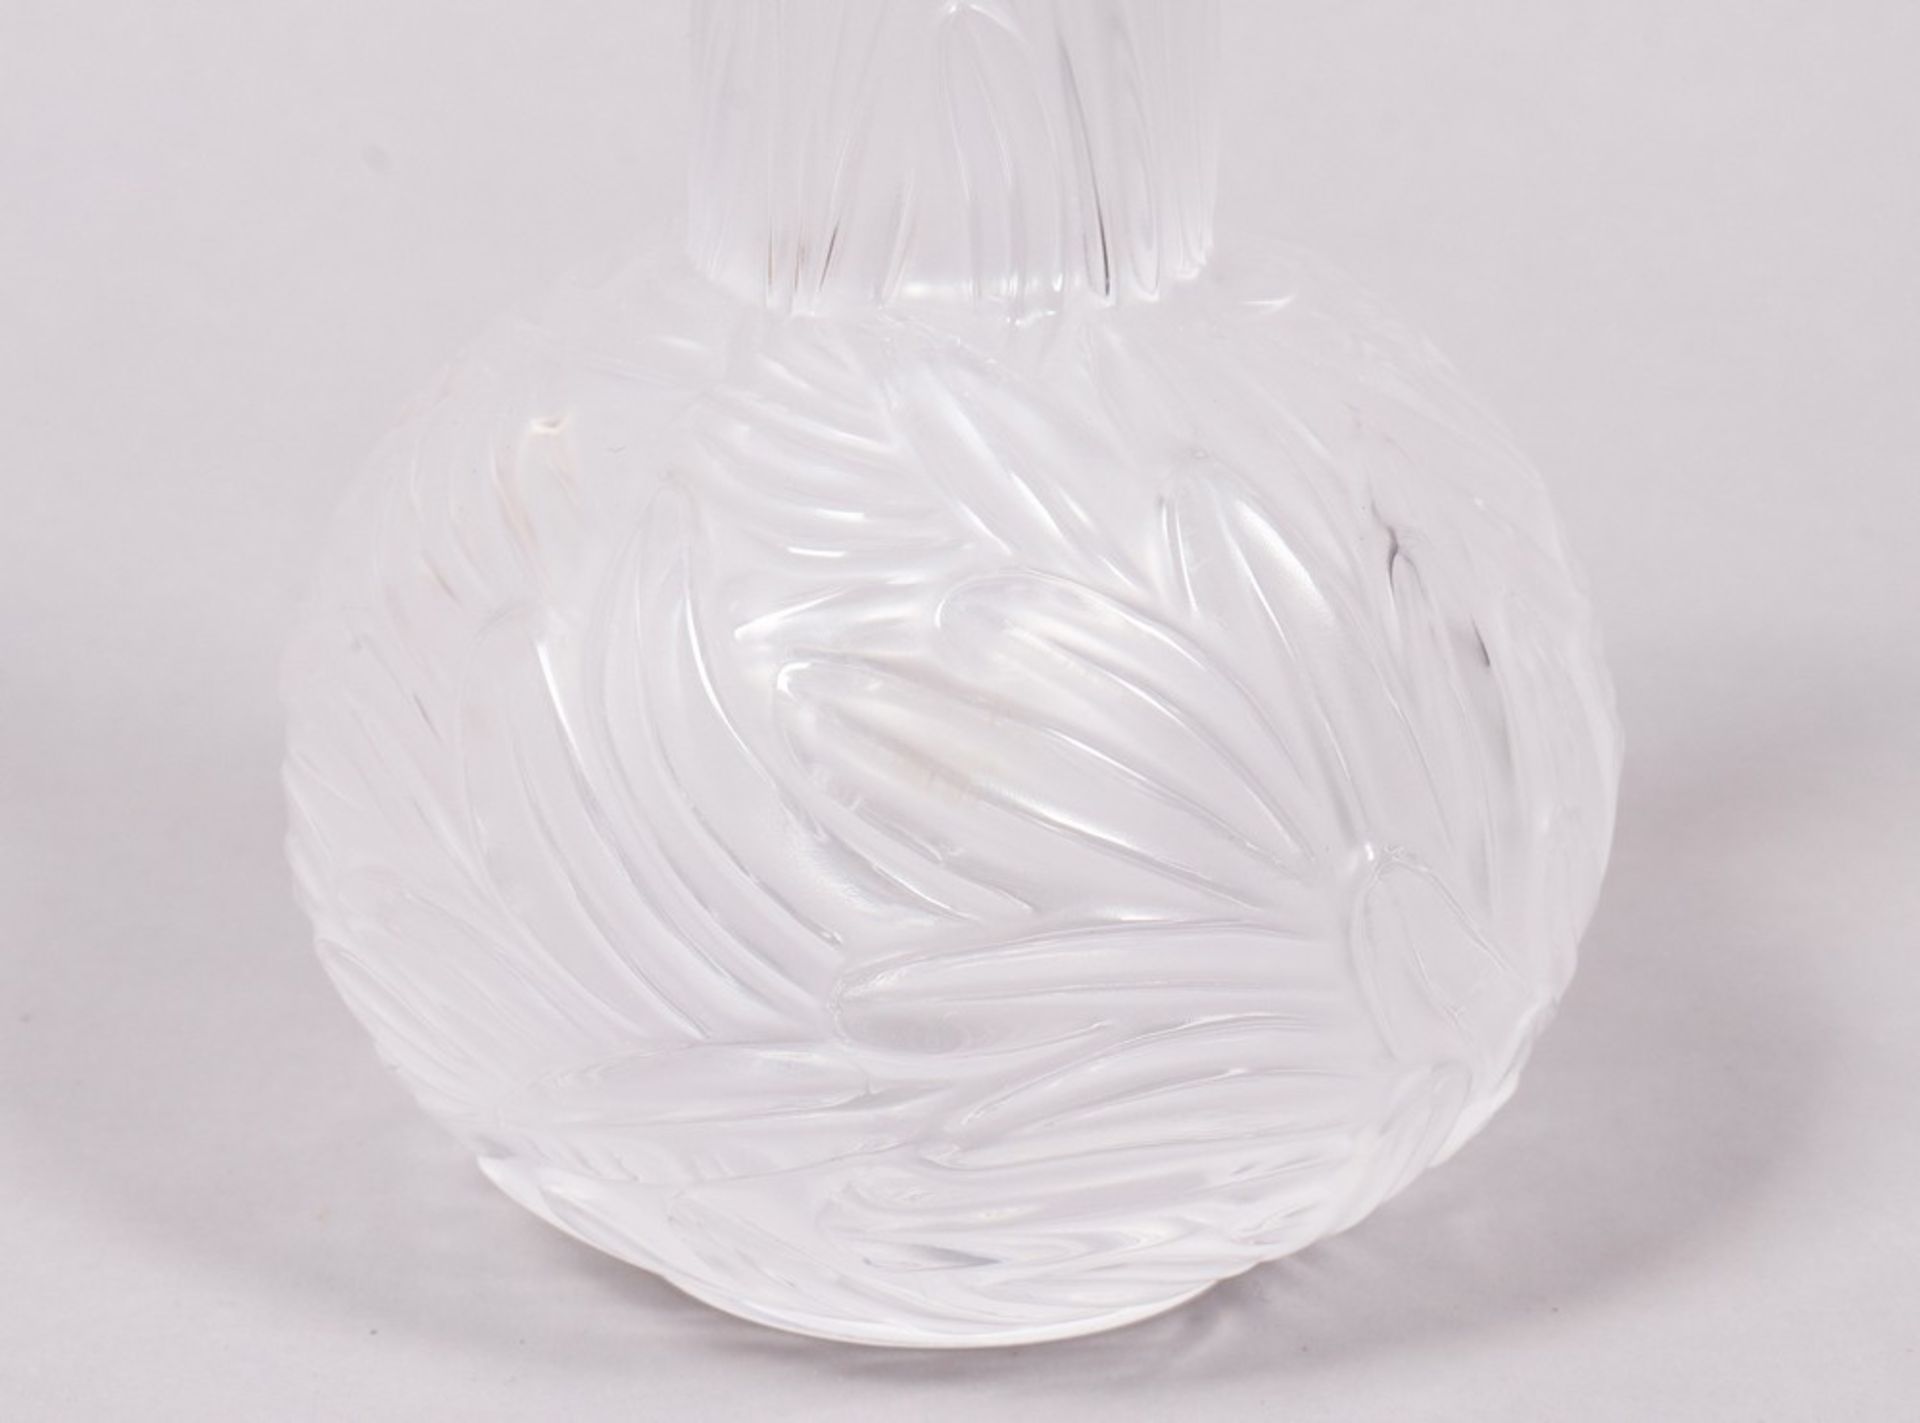 Small vase, Lalique, France, 20th C. - Image 2 of 4